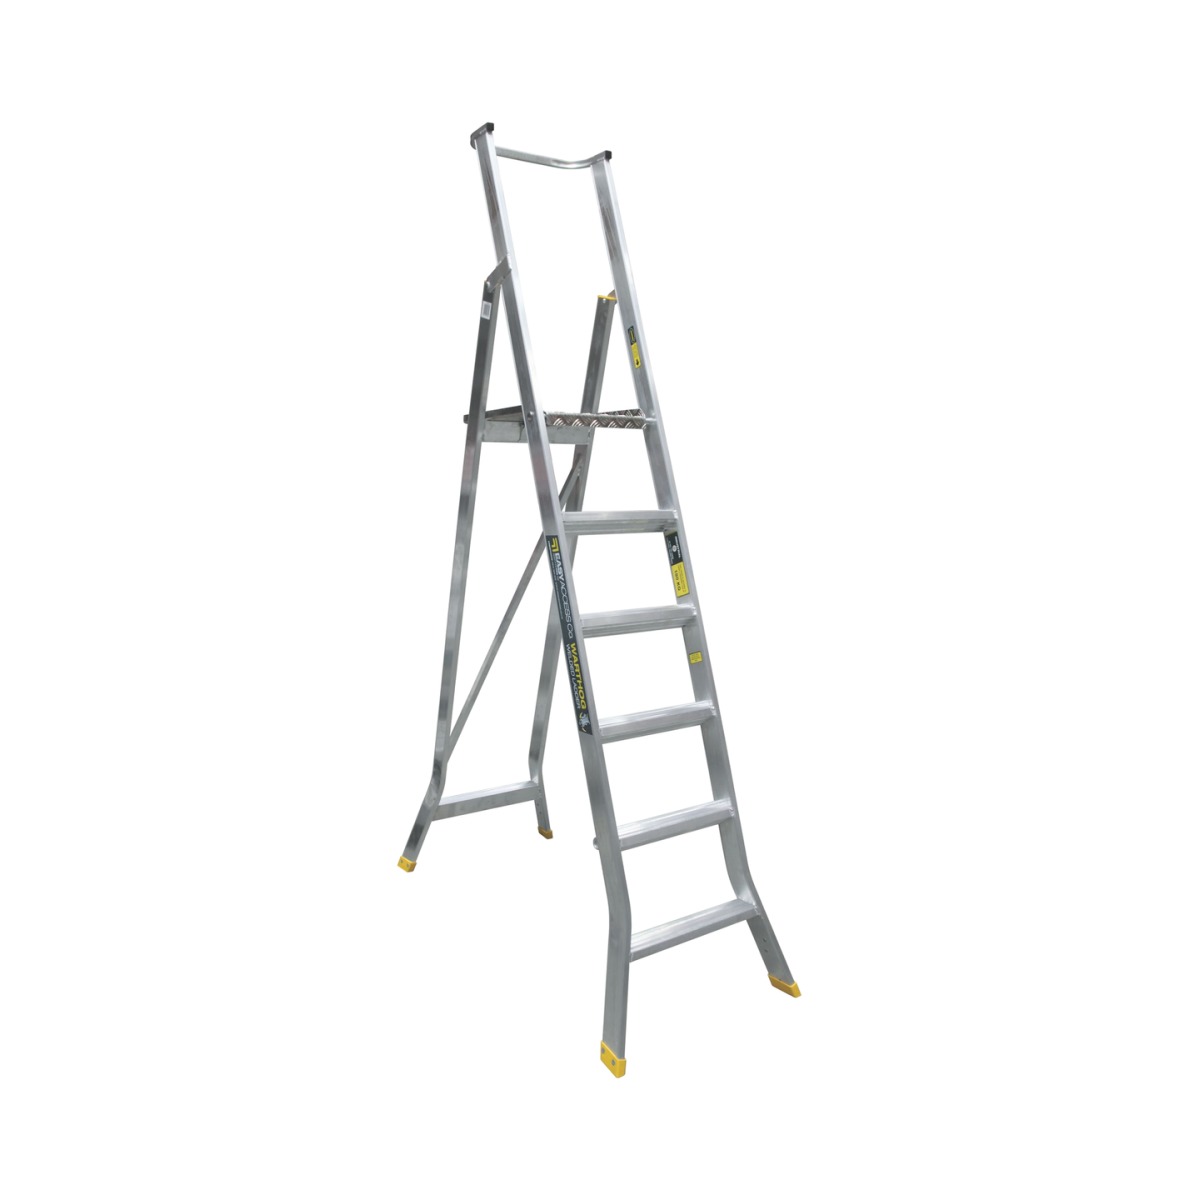 Buy Platform Ladders - Heavy-Duty in Platform Ladders from Warthog available at Astrolift NZ